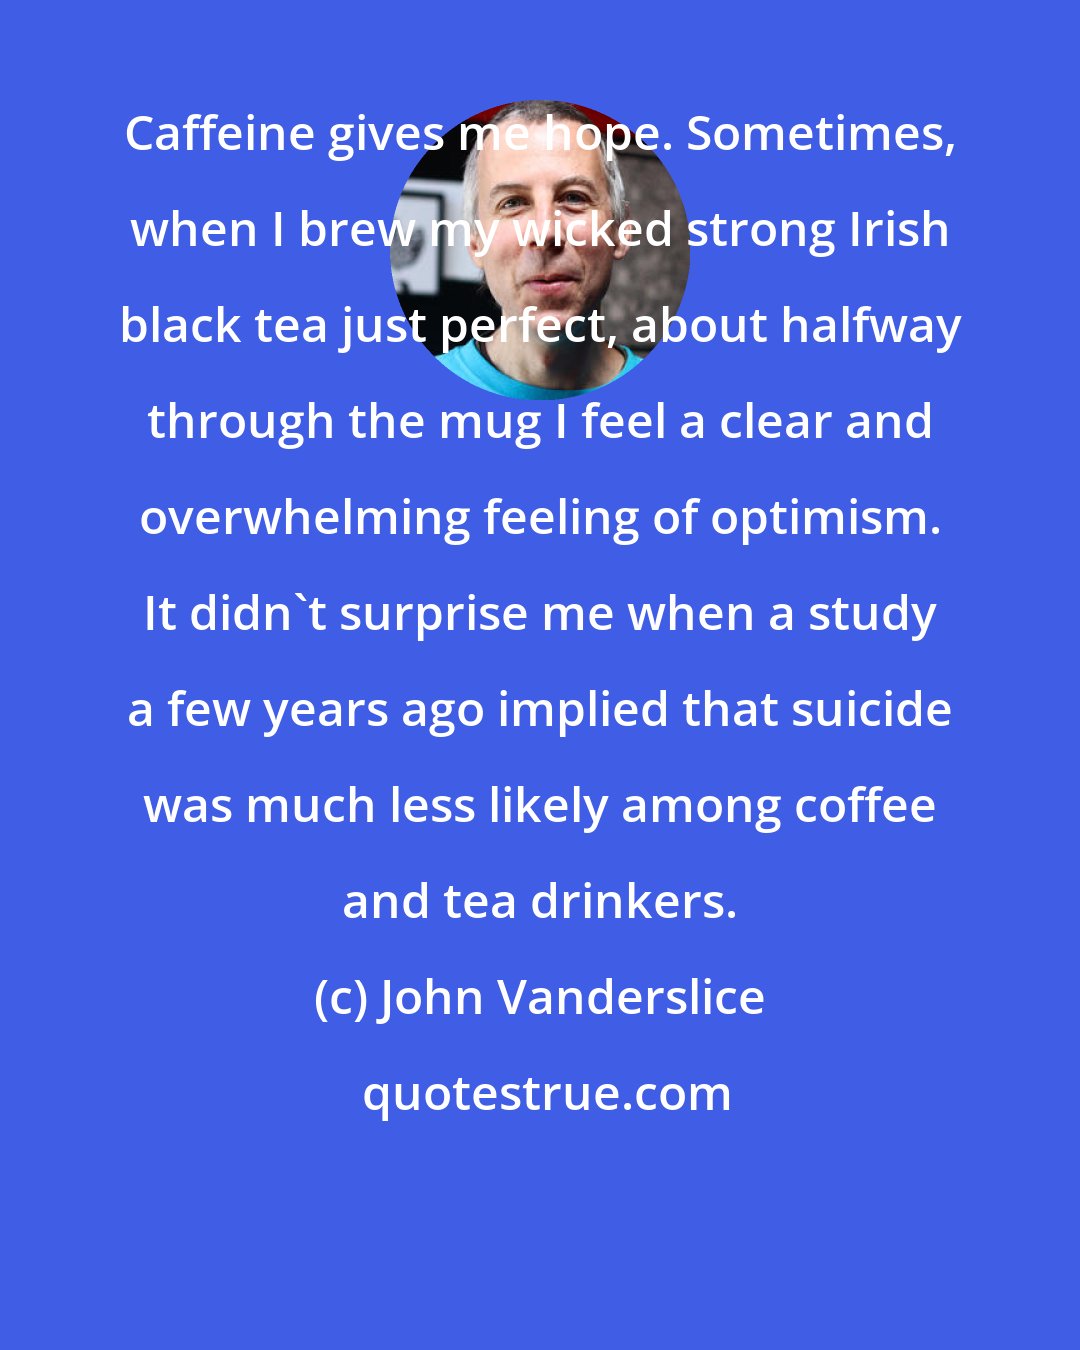 John Vanderslice: Caffeine gives me hope. Sometimes, when I brew my wicked strong Irish black tea just perfect, about halfway through the mug I feel a clear and overwhelming feeling of optimism. It didn't surprise me when a study a few years ago implied that suicide was much less likely among coffee and tea drinkers.